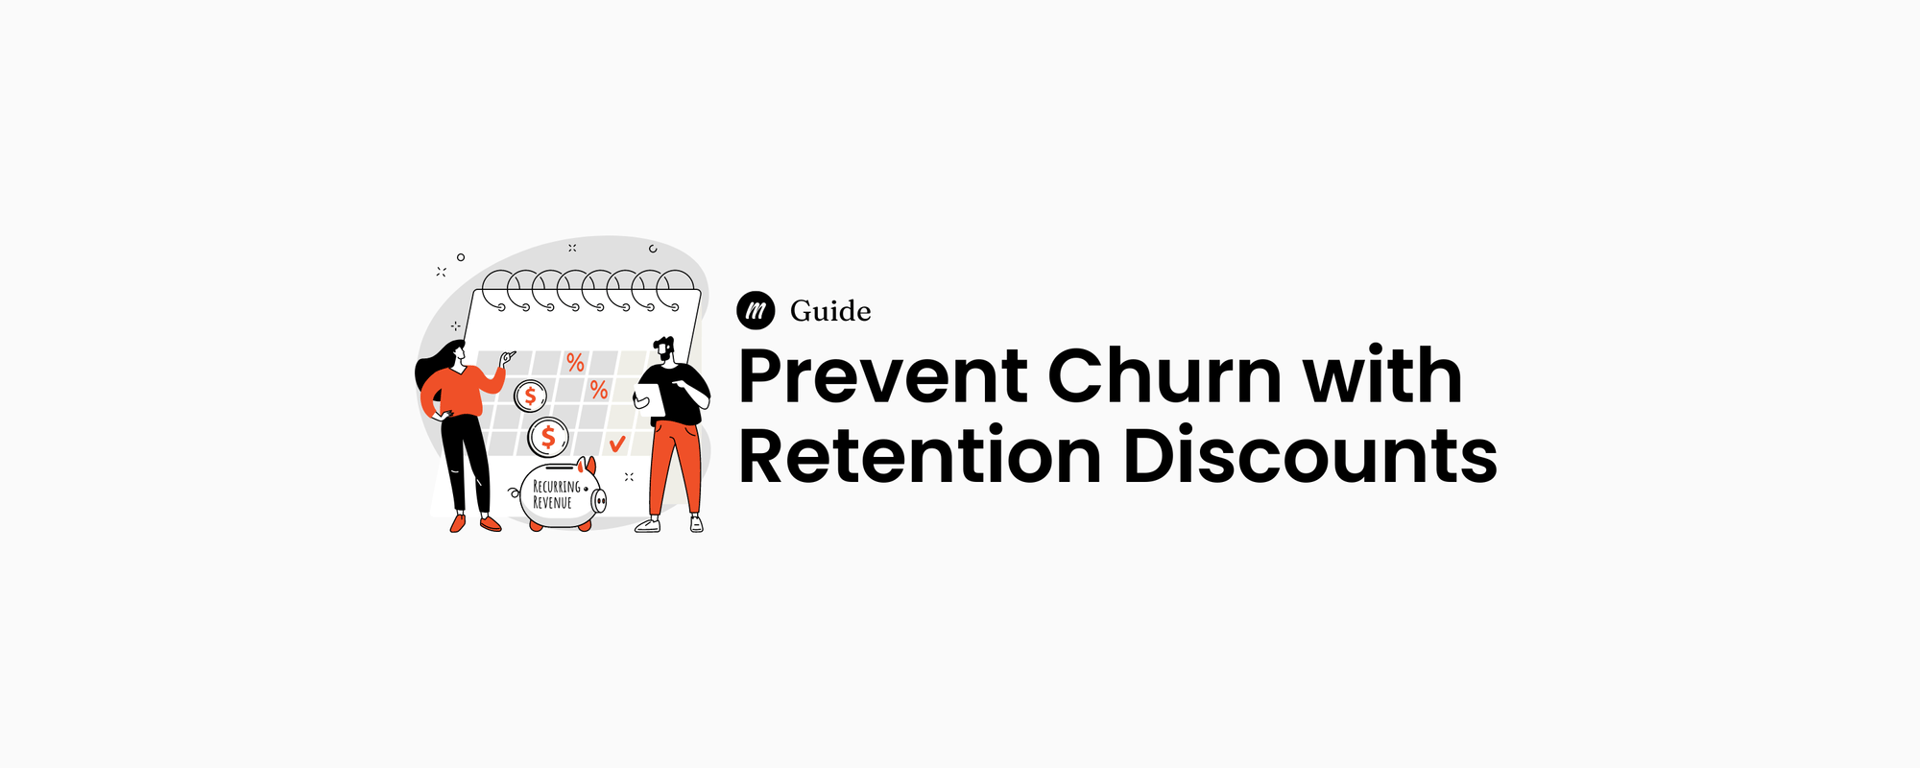 Use Retention Discounts to Prevent Churn